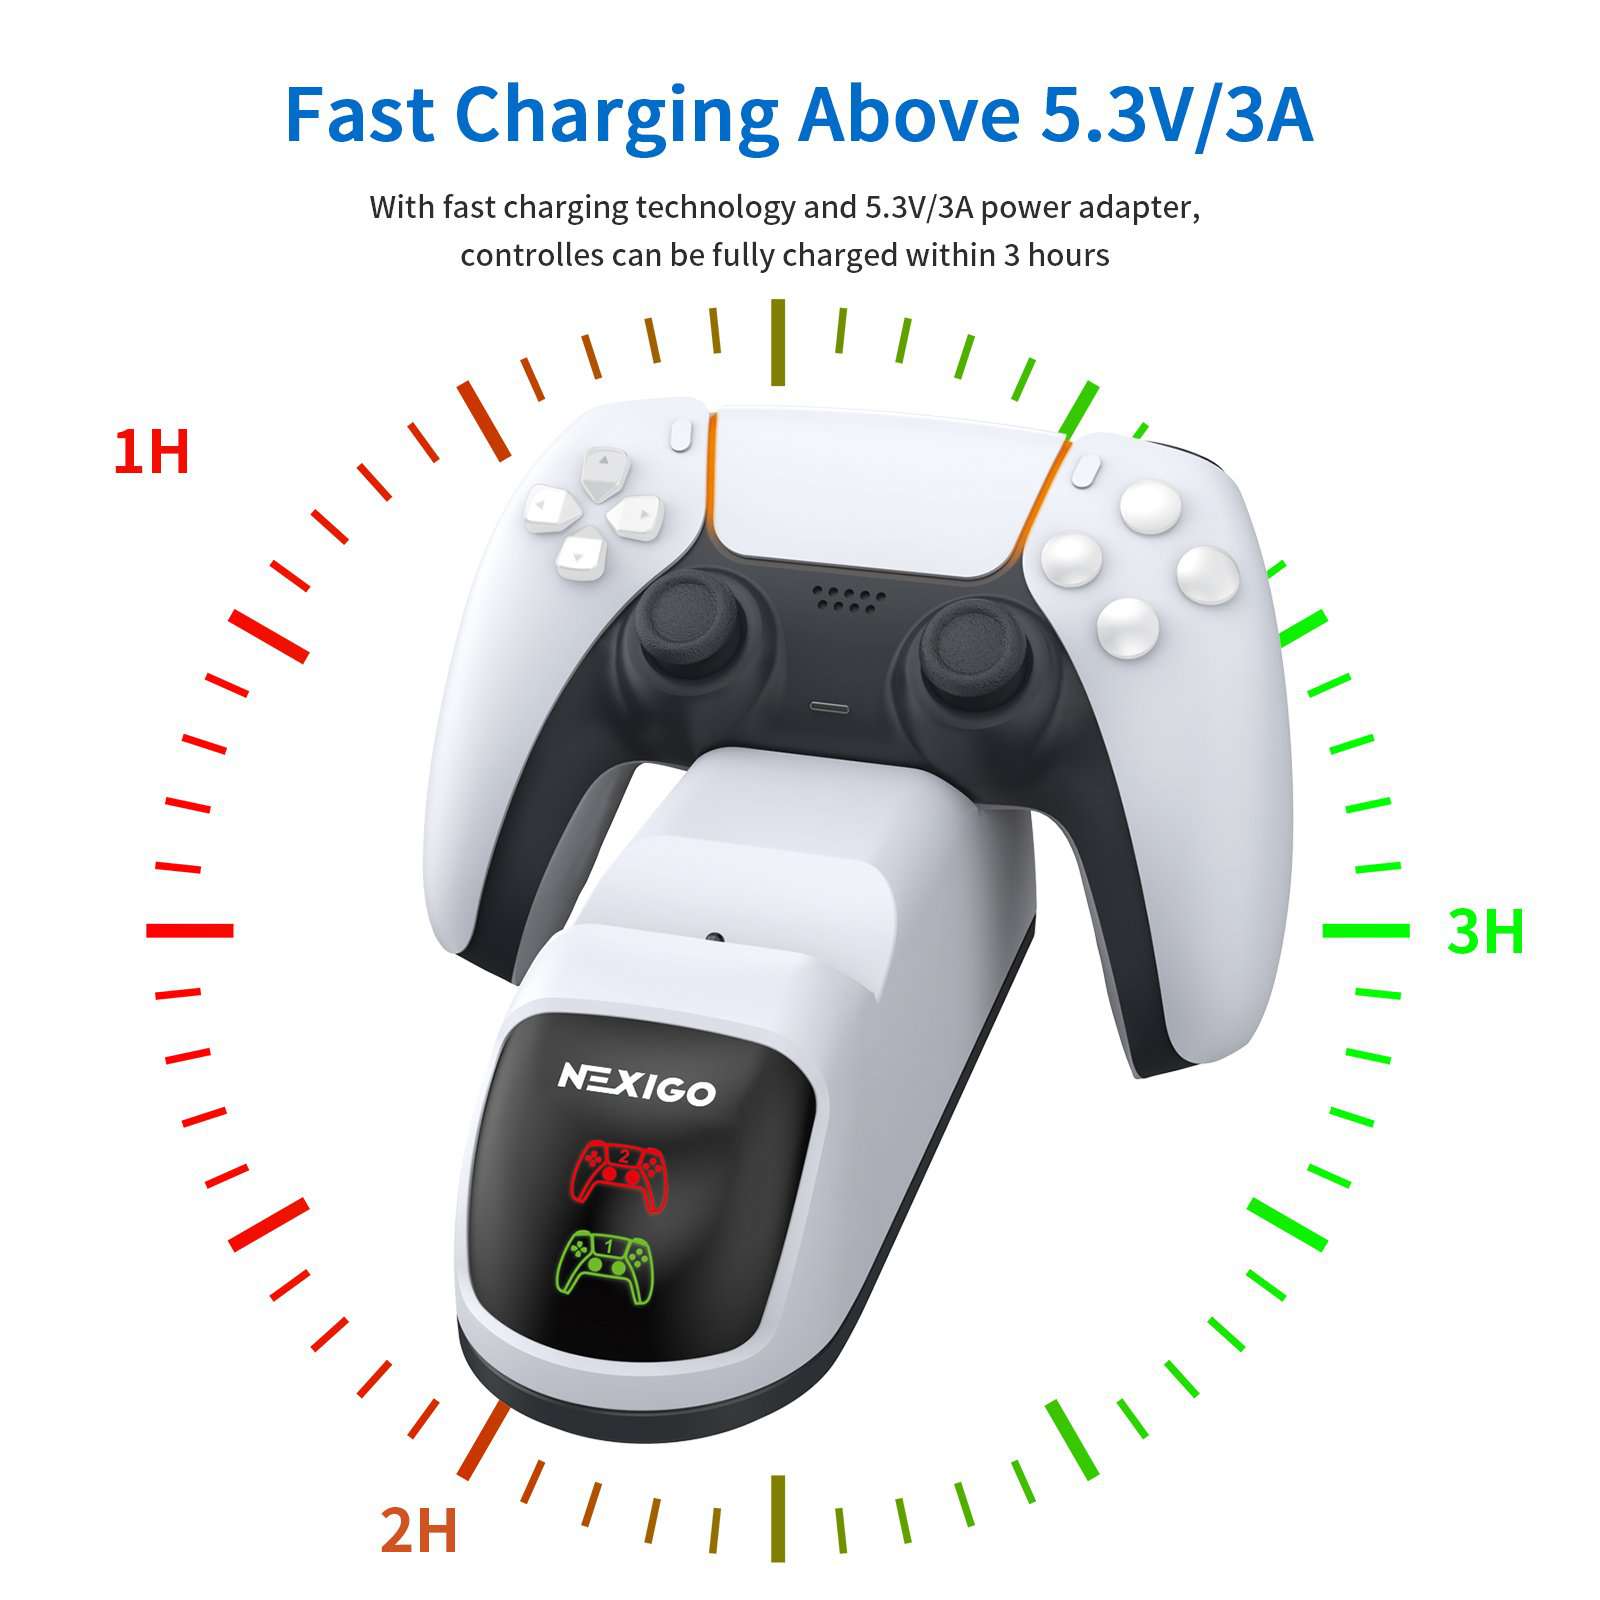 Fast charge PS5 controllers in 3 hours with this station (5.3V/3A)